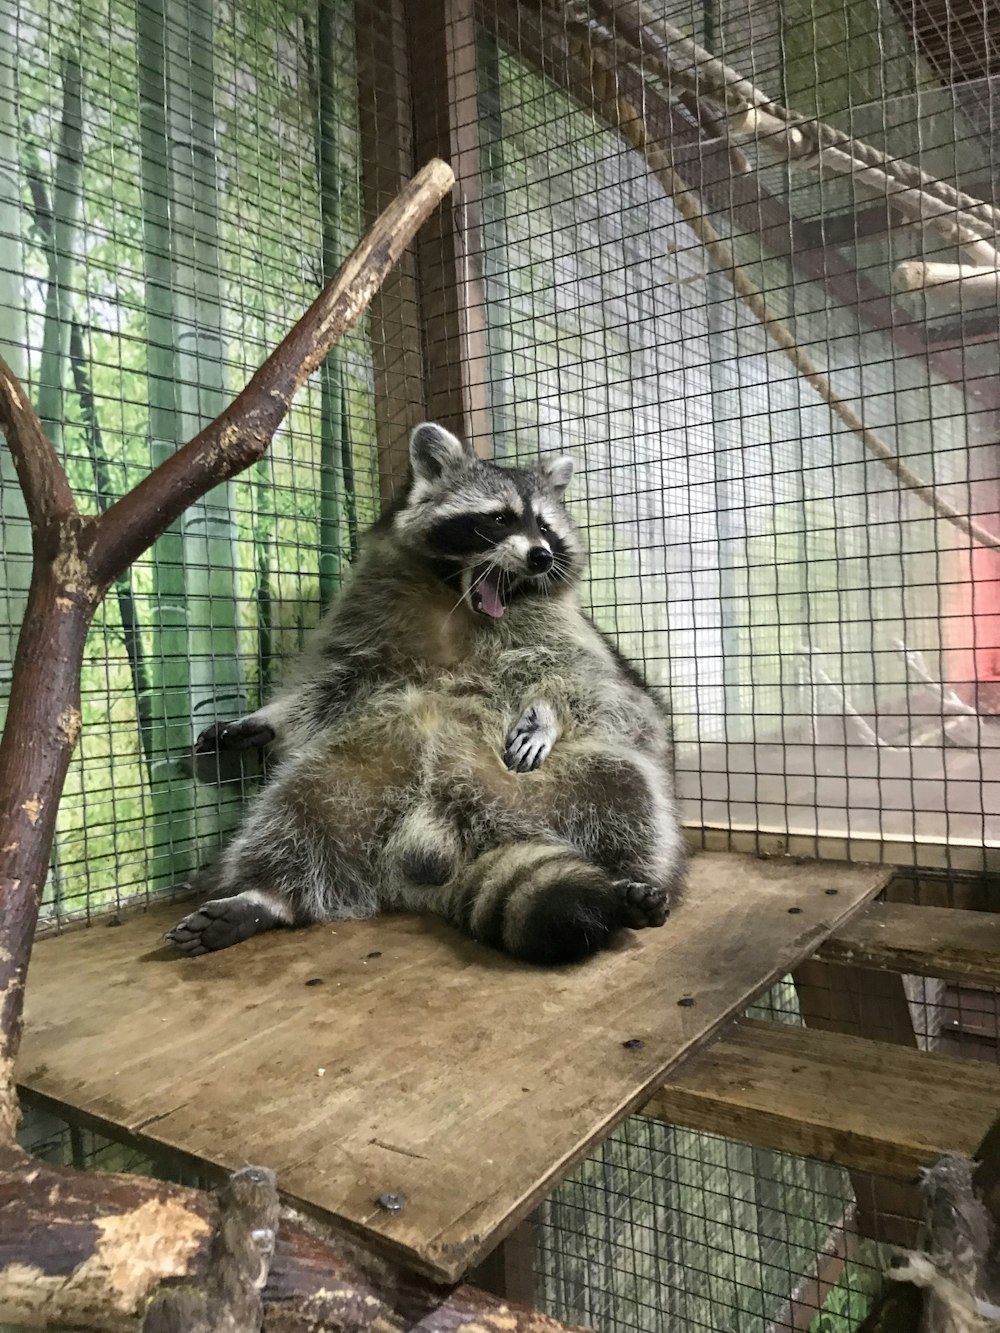 raccoon sitting on a wooden platform in a cage